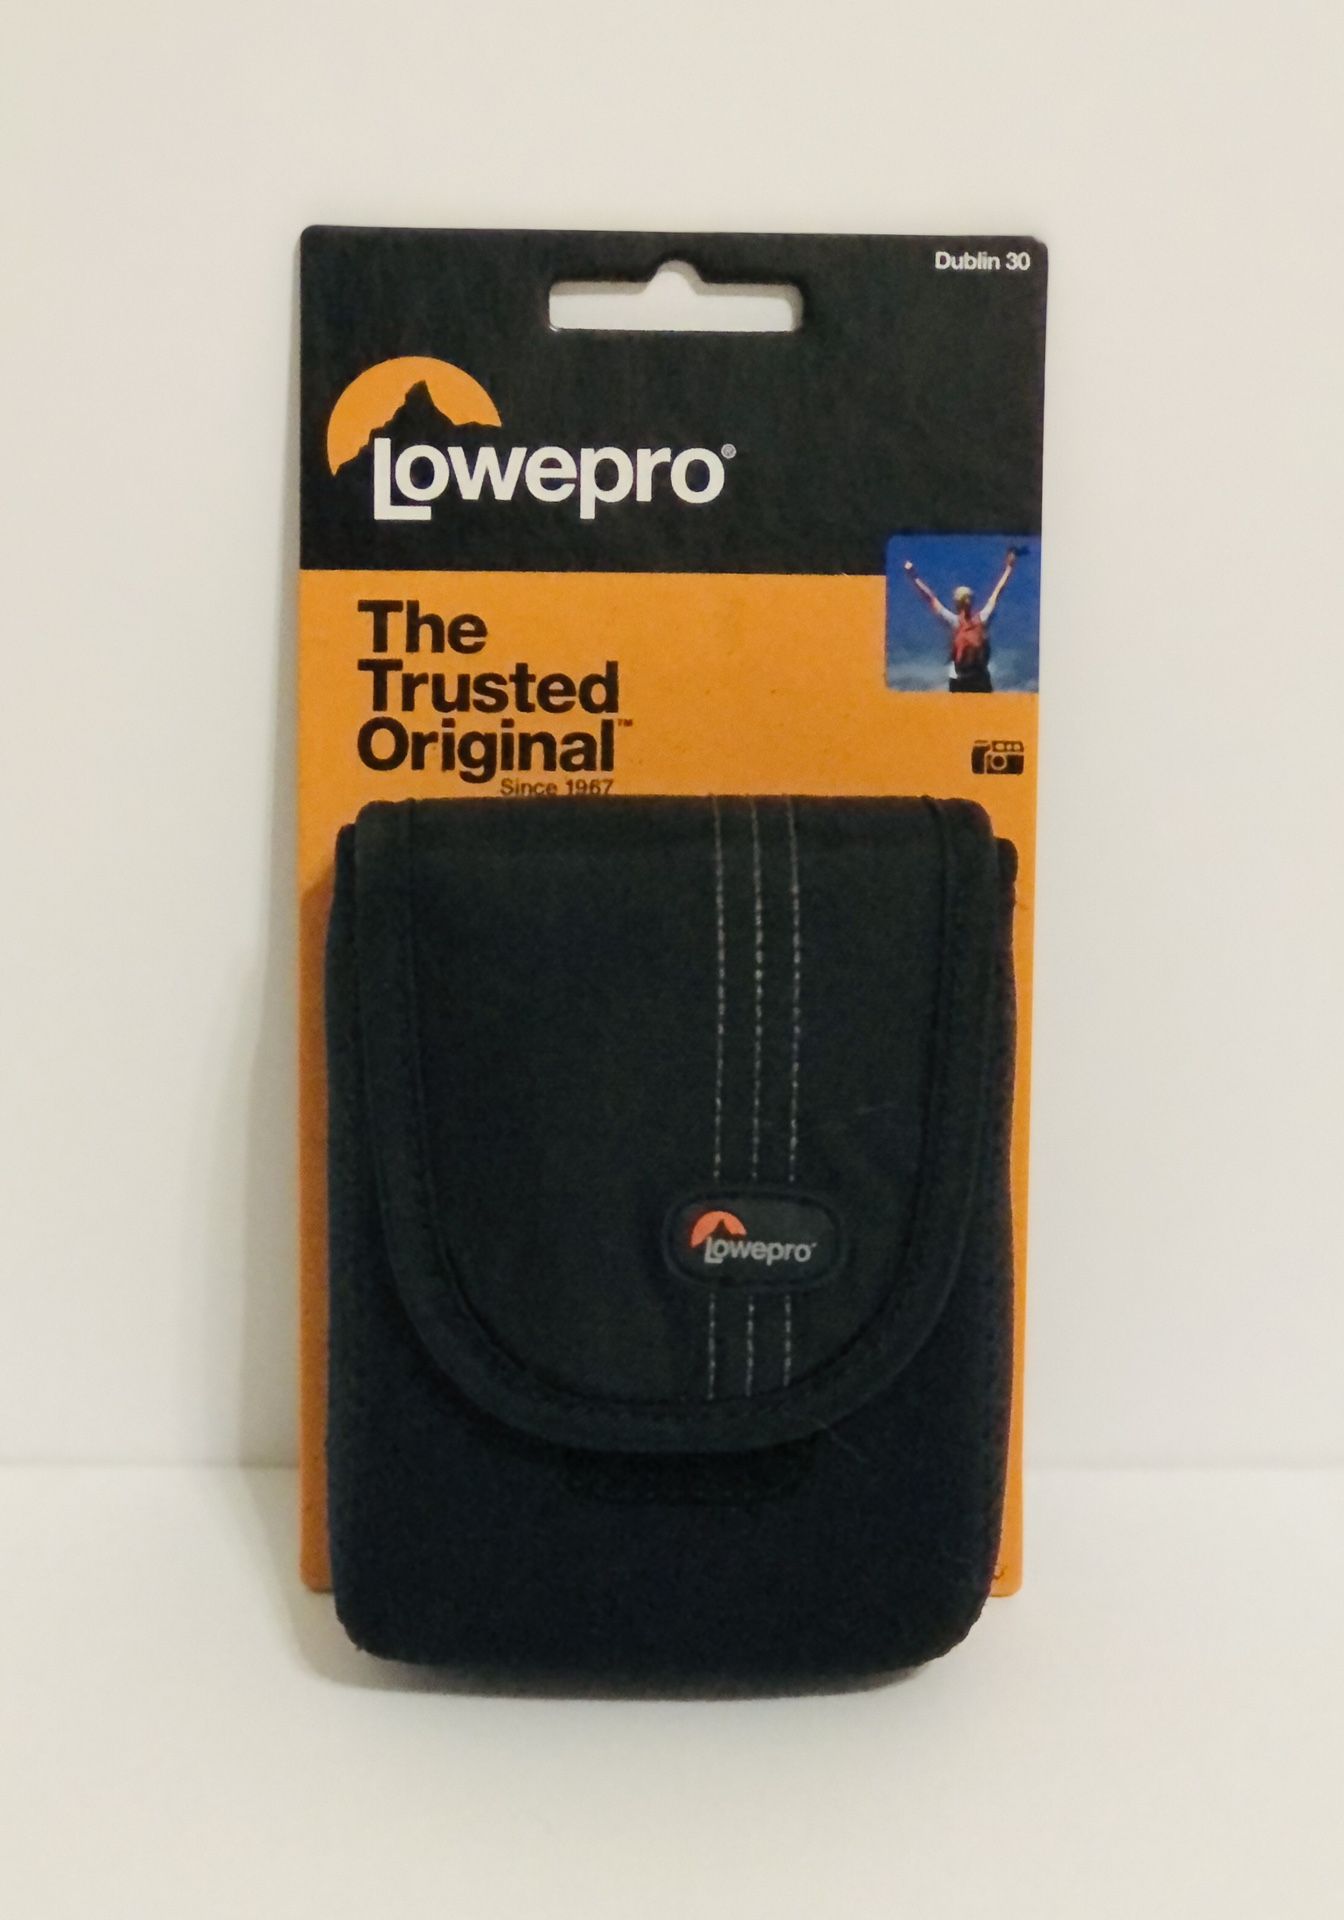 Lowepro Dublin 30 Slim Profile Pouch for Cameras and Compact Video Cameras NEW